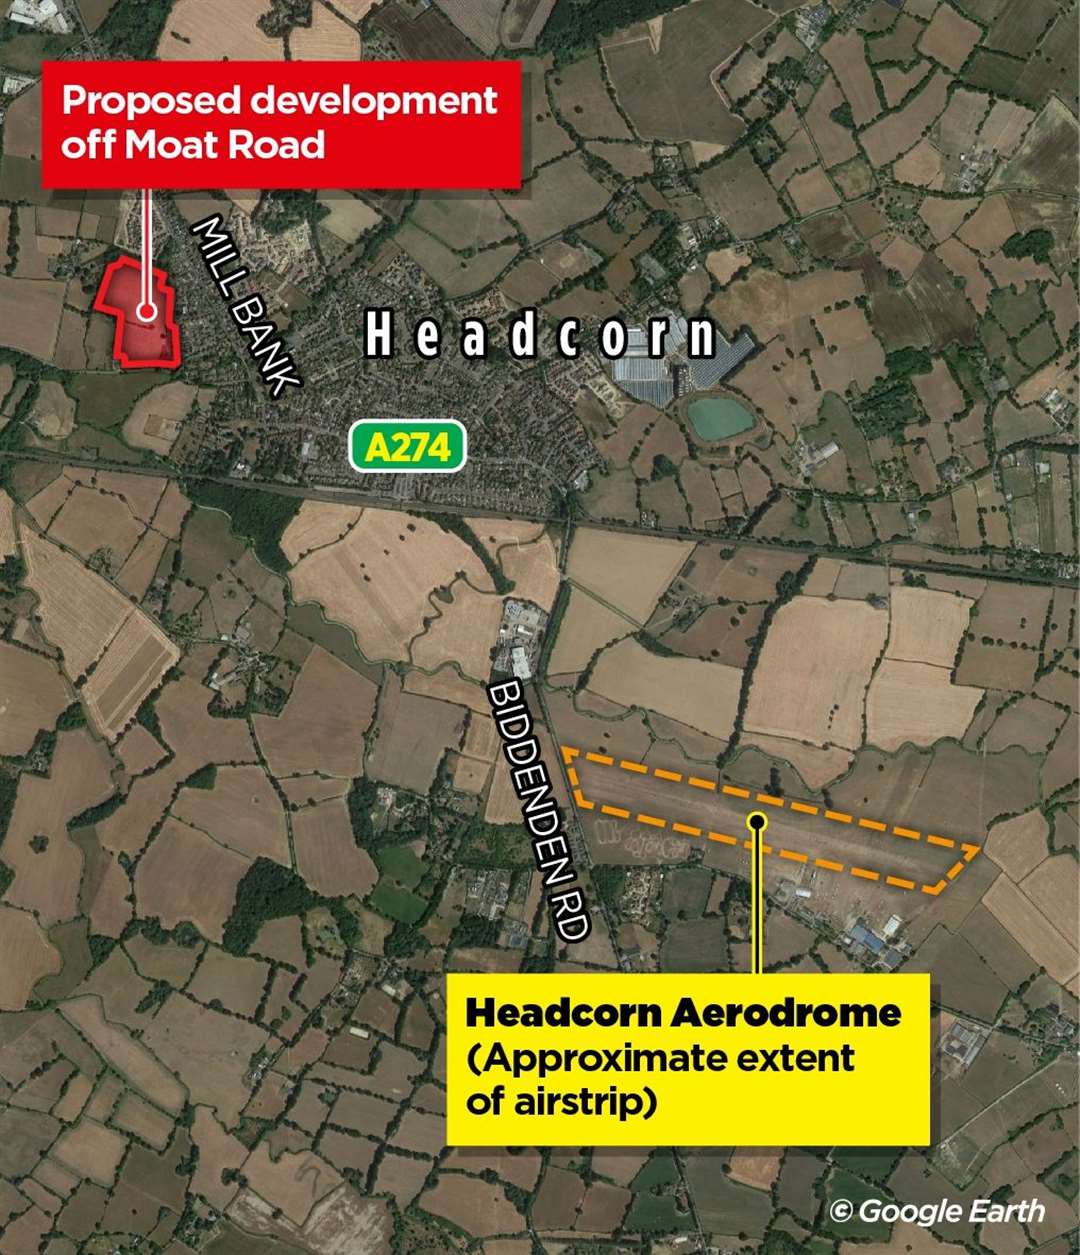 The proposed development is about two miles away from Headcorn Aerodrome